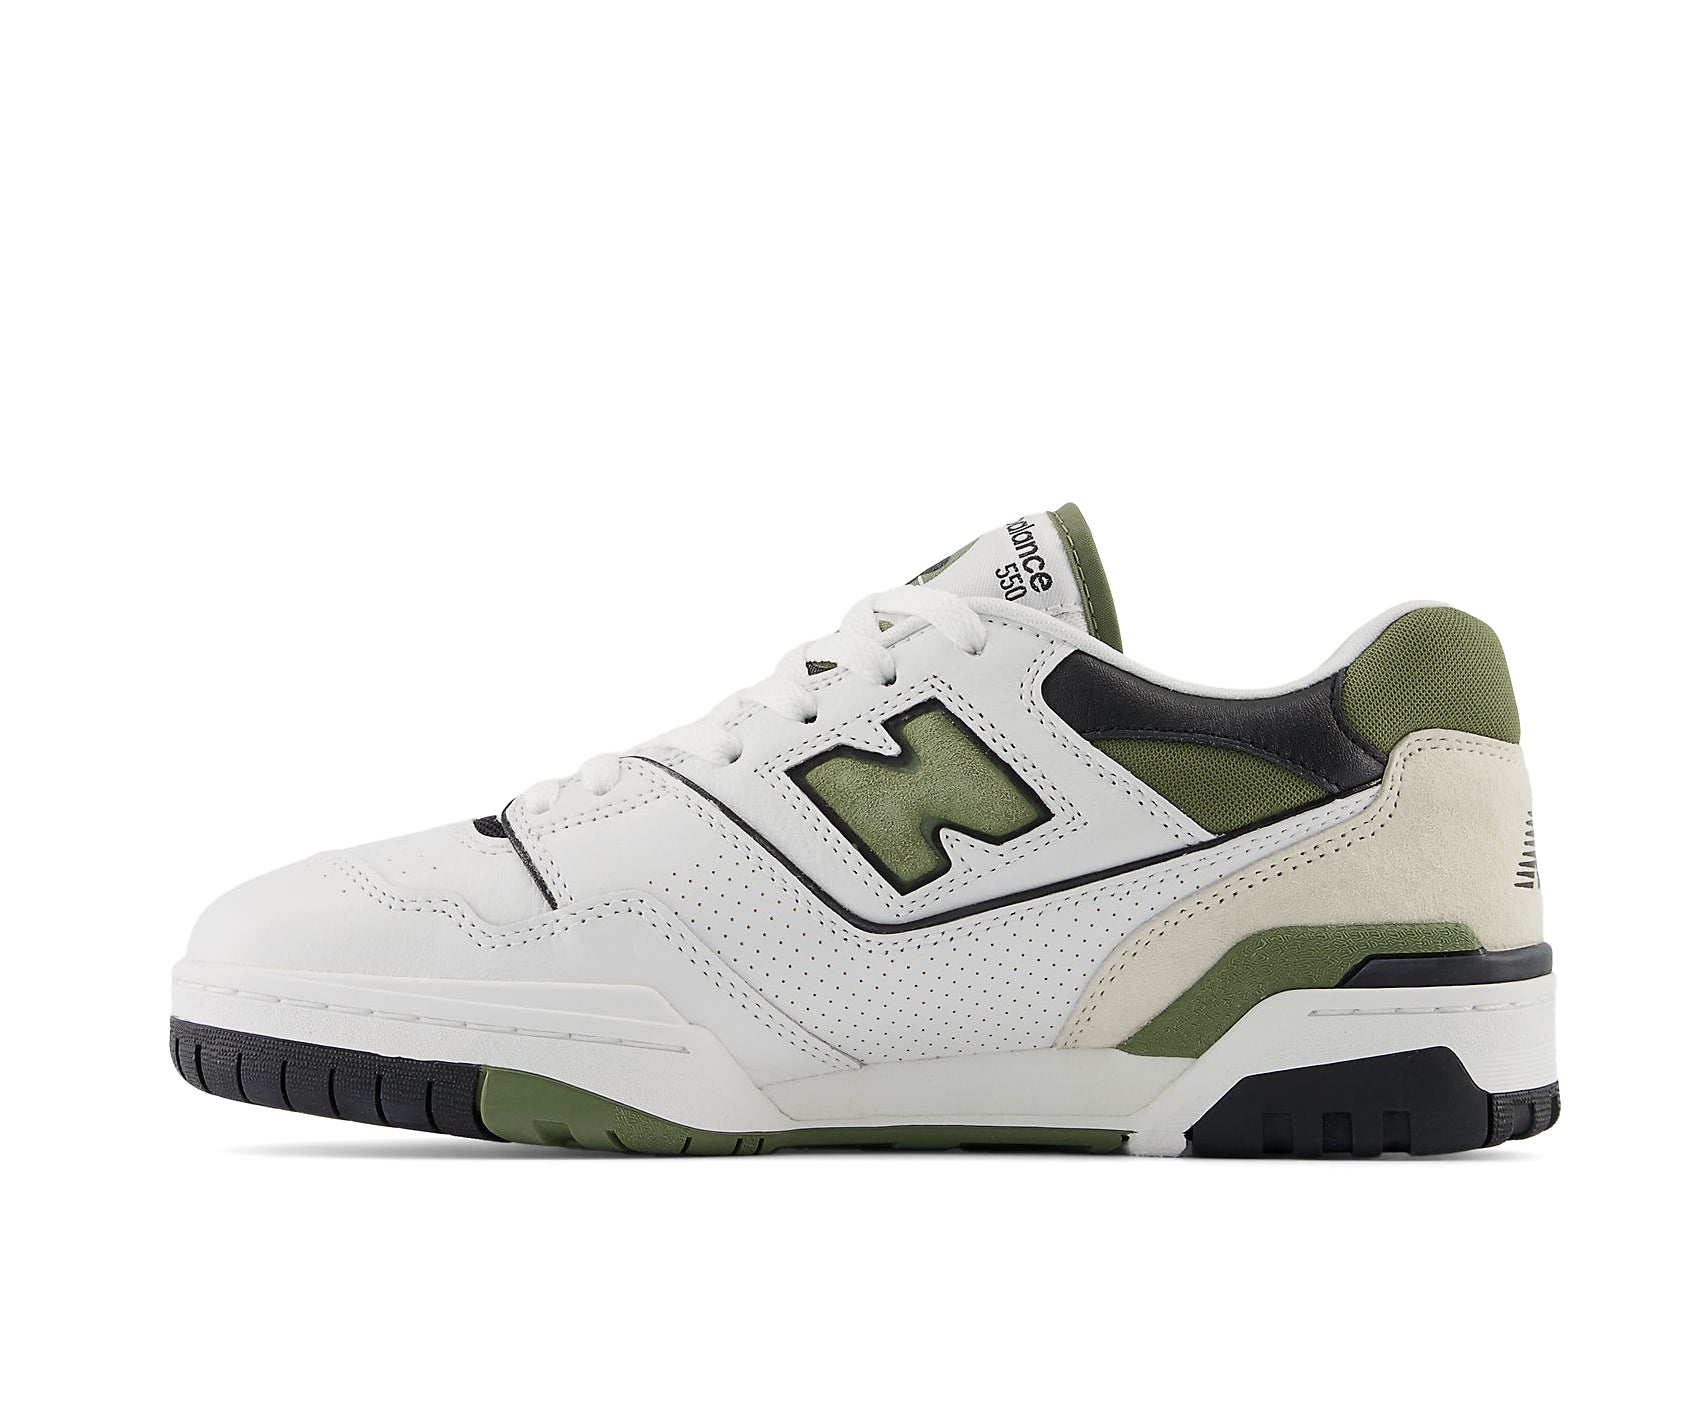 A white leather basketball sneaker with green and black accents from New Balance.